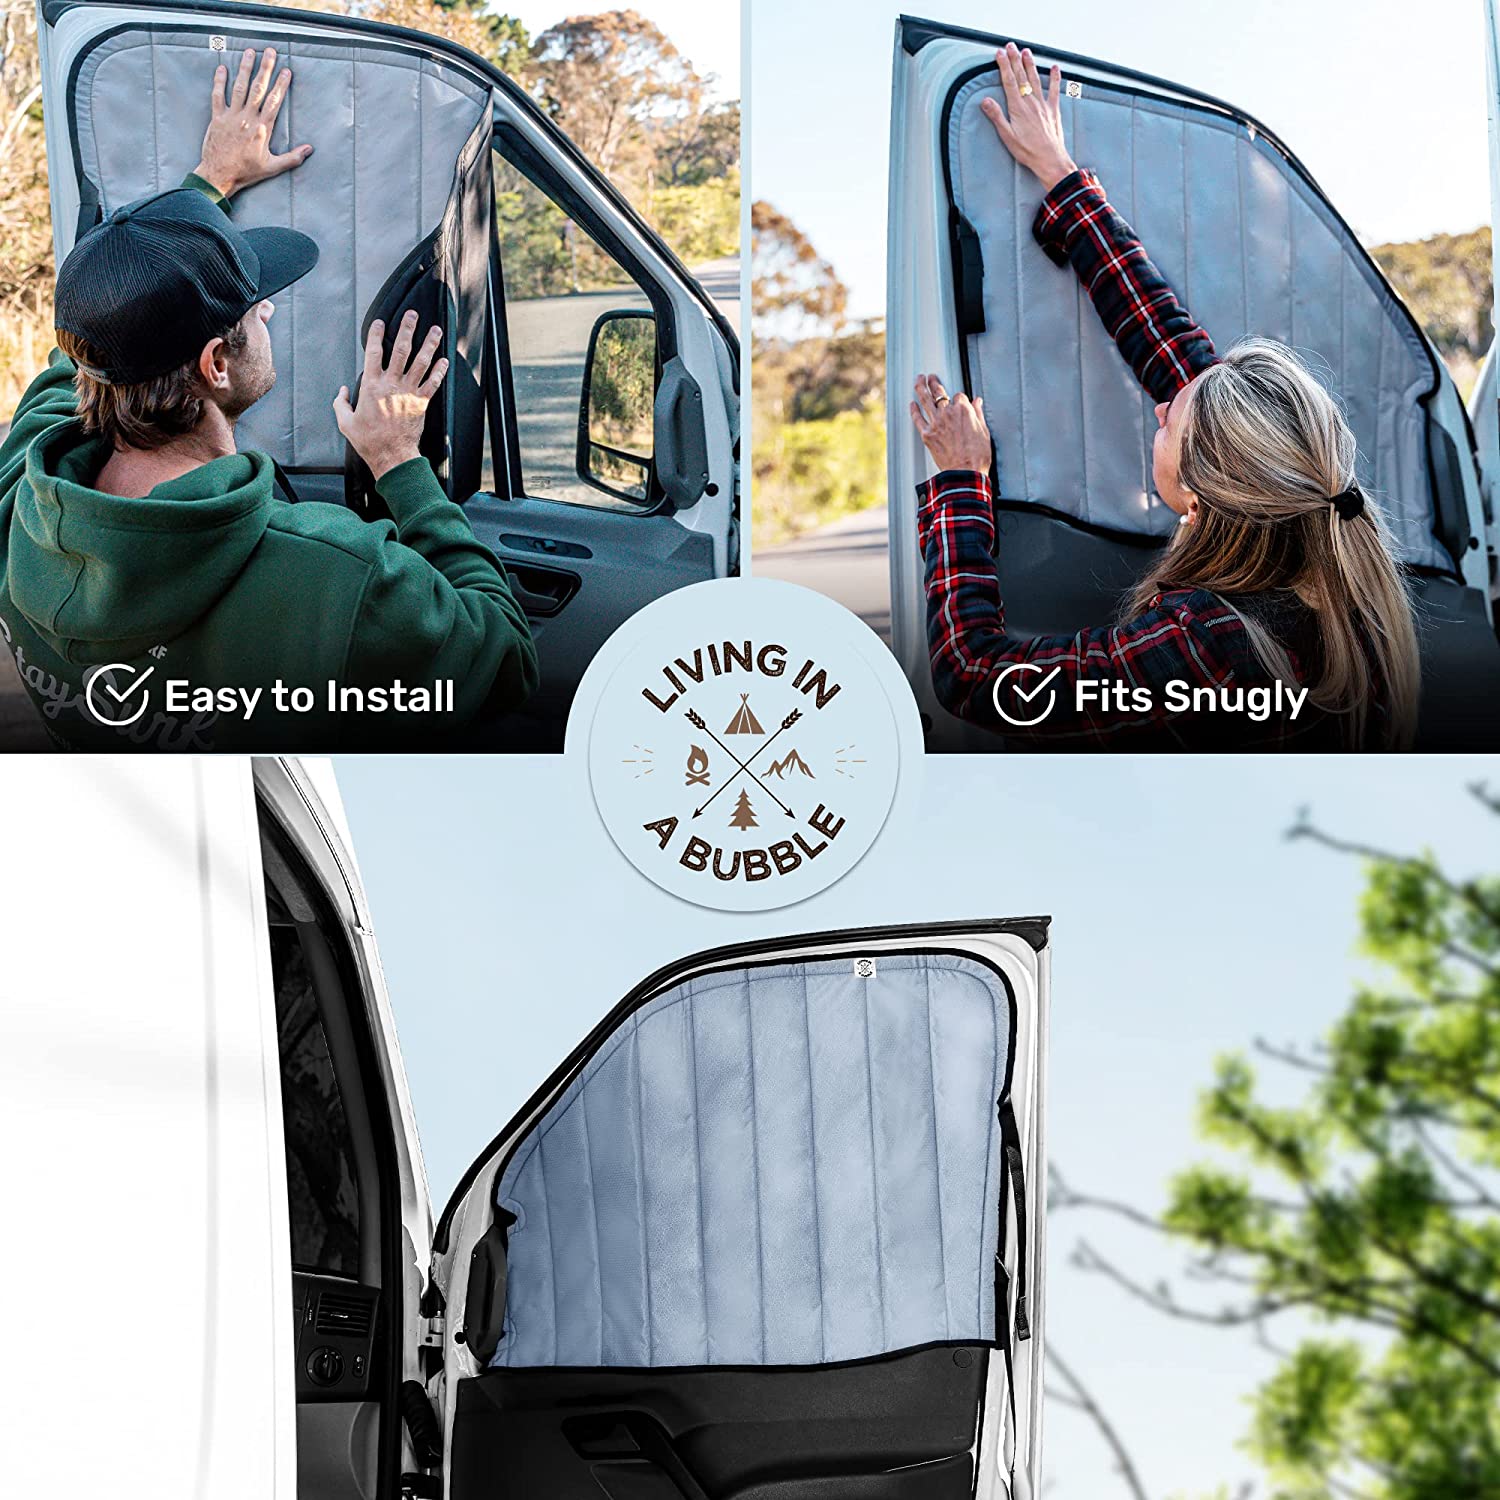 Insulated Window Covers 2 Products Bundle - Cab Set